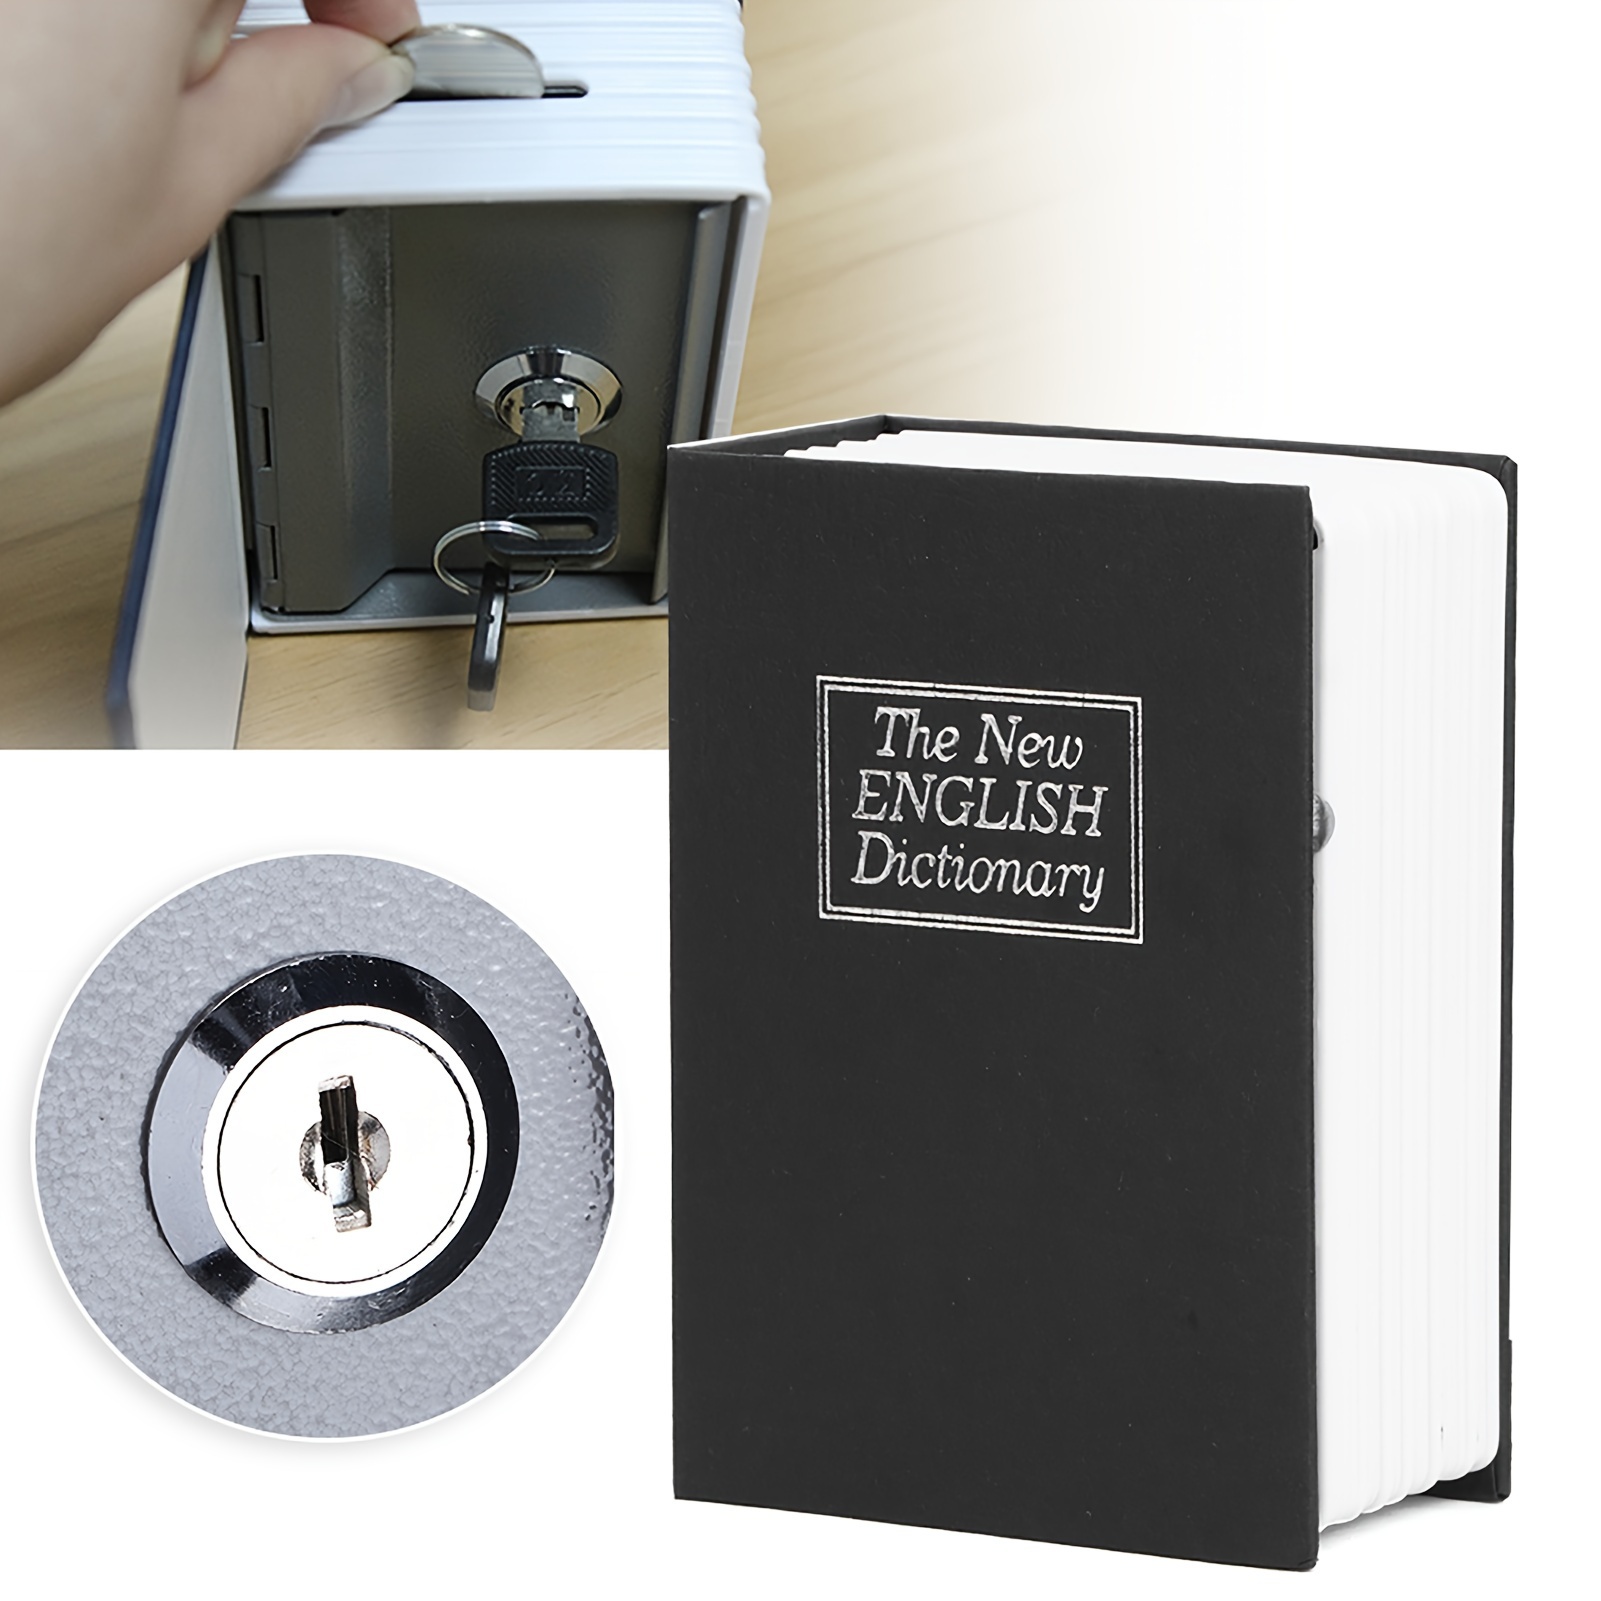 

Book Safe With Lock, Portable Hidden Safe Box With 2 Keys, Home And Office Safe Box For Jewelry, Money, Cash Security